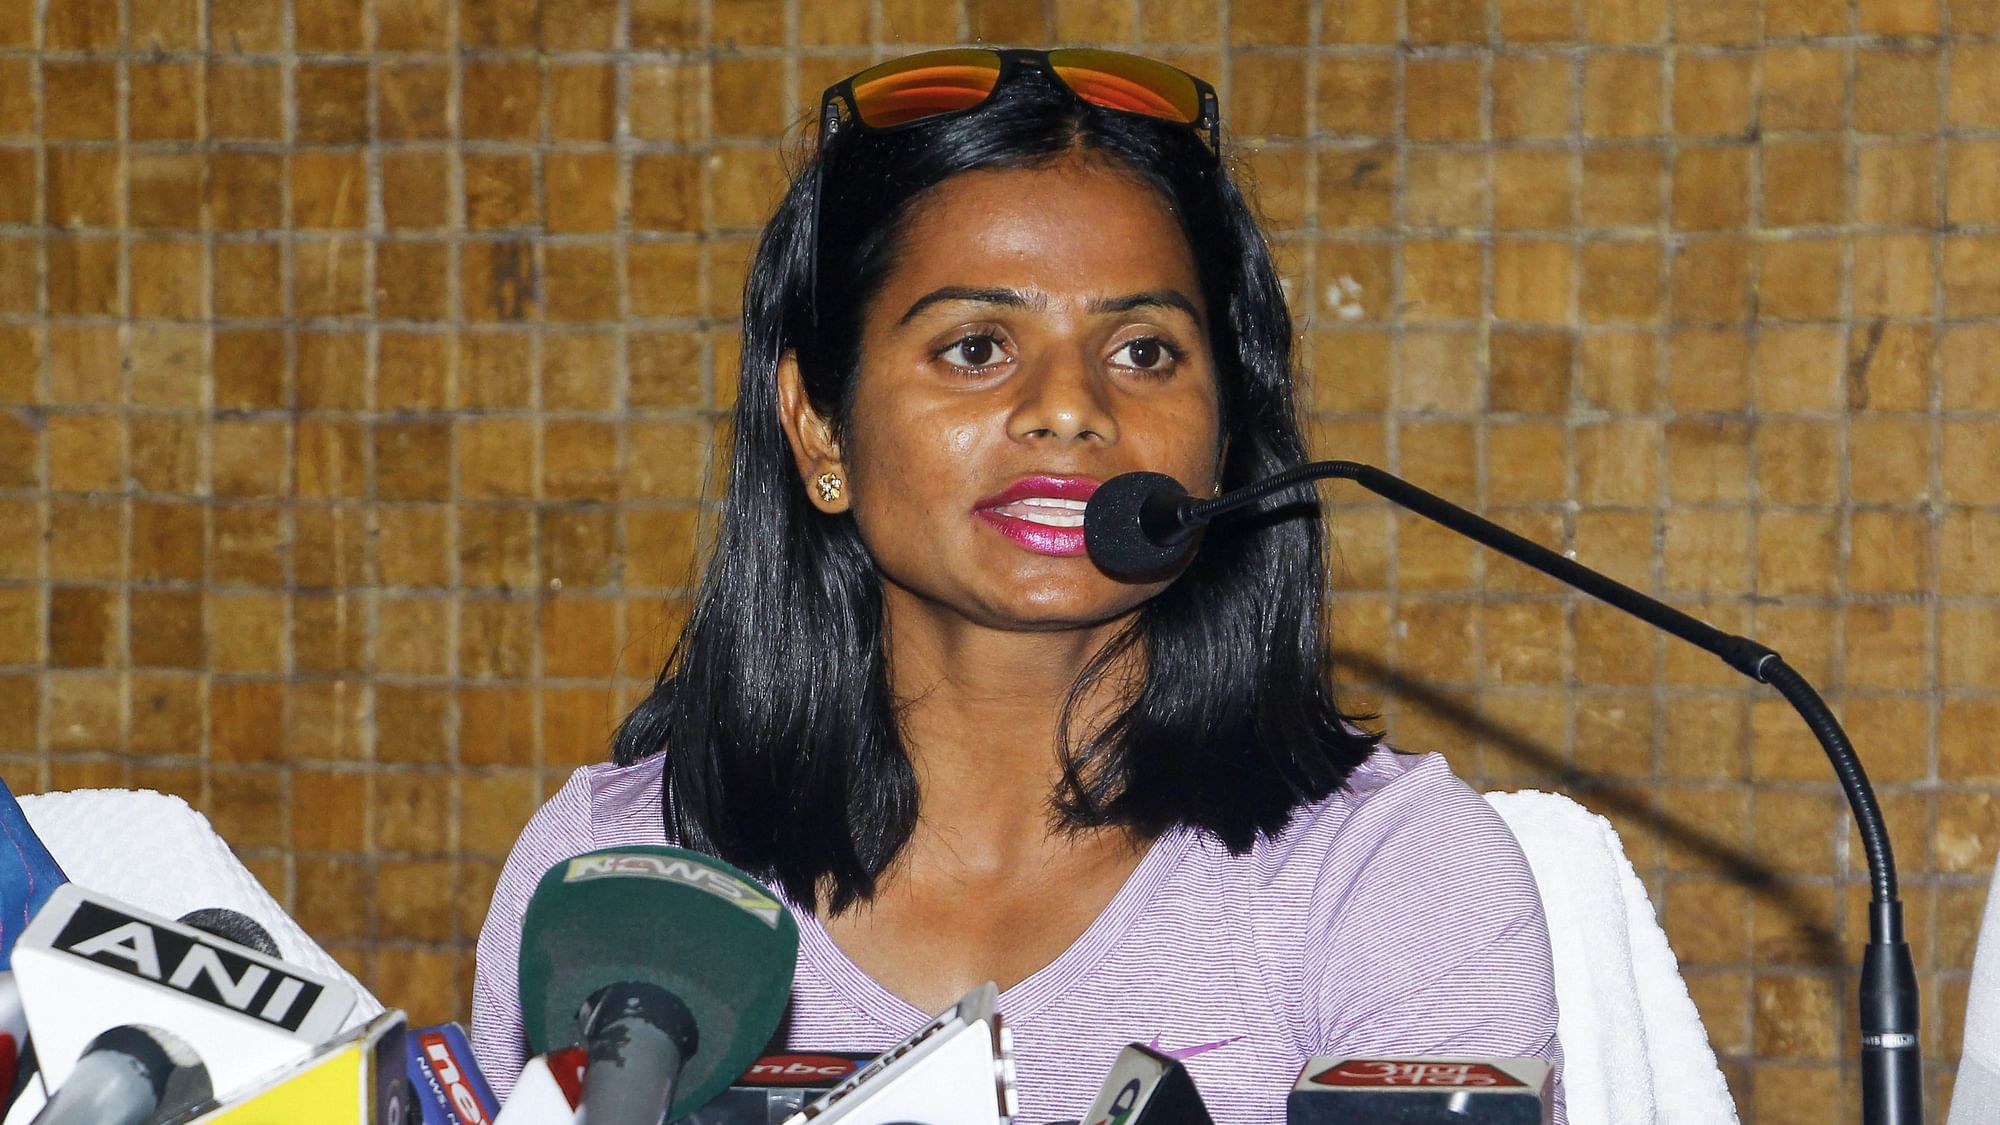 India’s star sprinter Dutee Chand in a press conference on Tuesday, 21 May, revealed that she had been forced to come out.